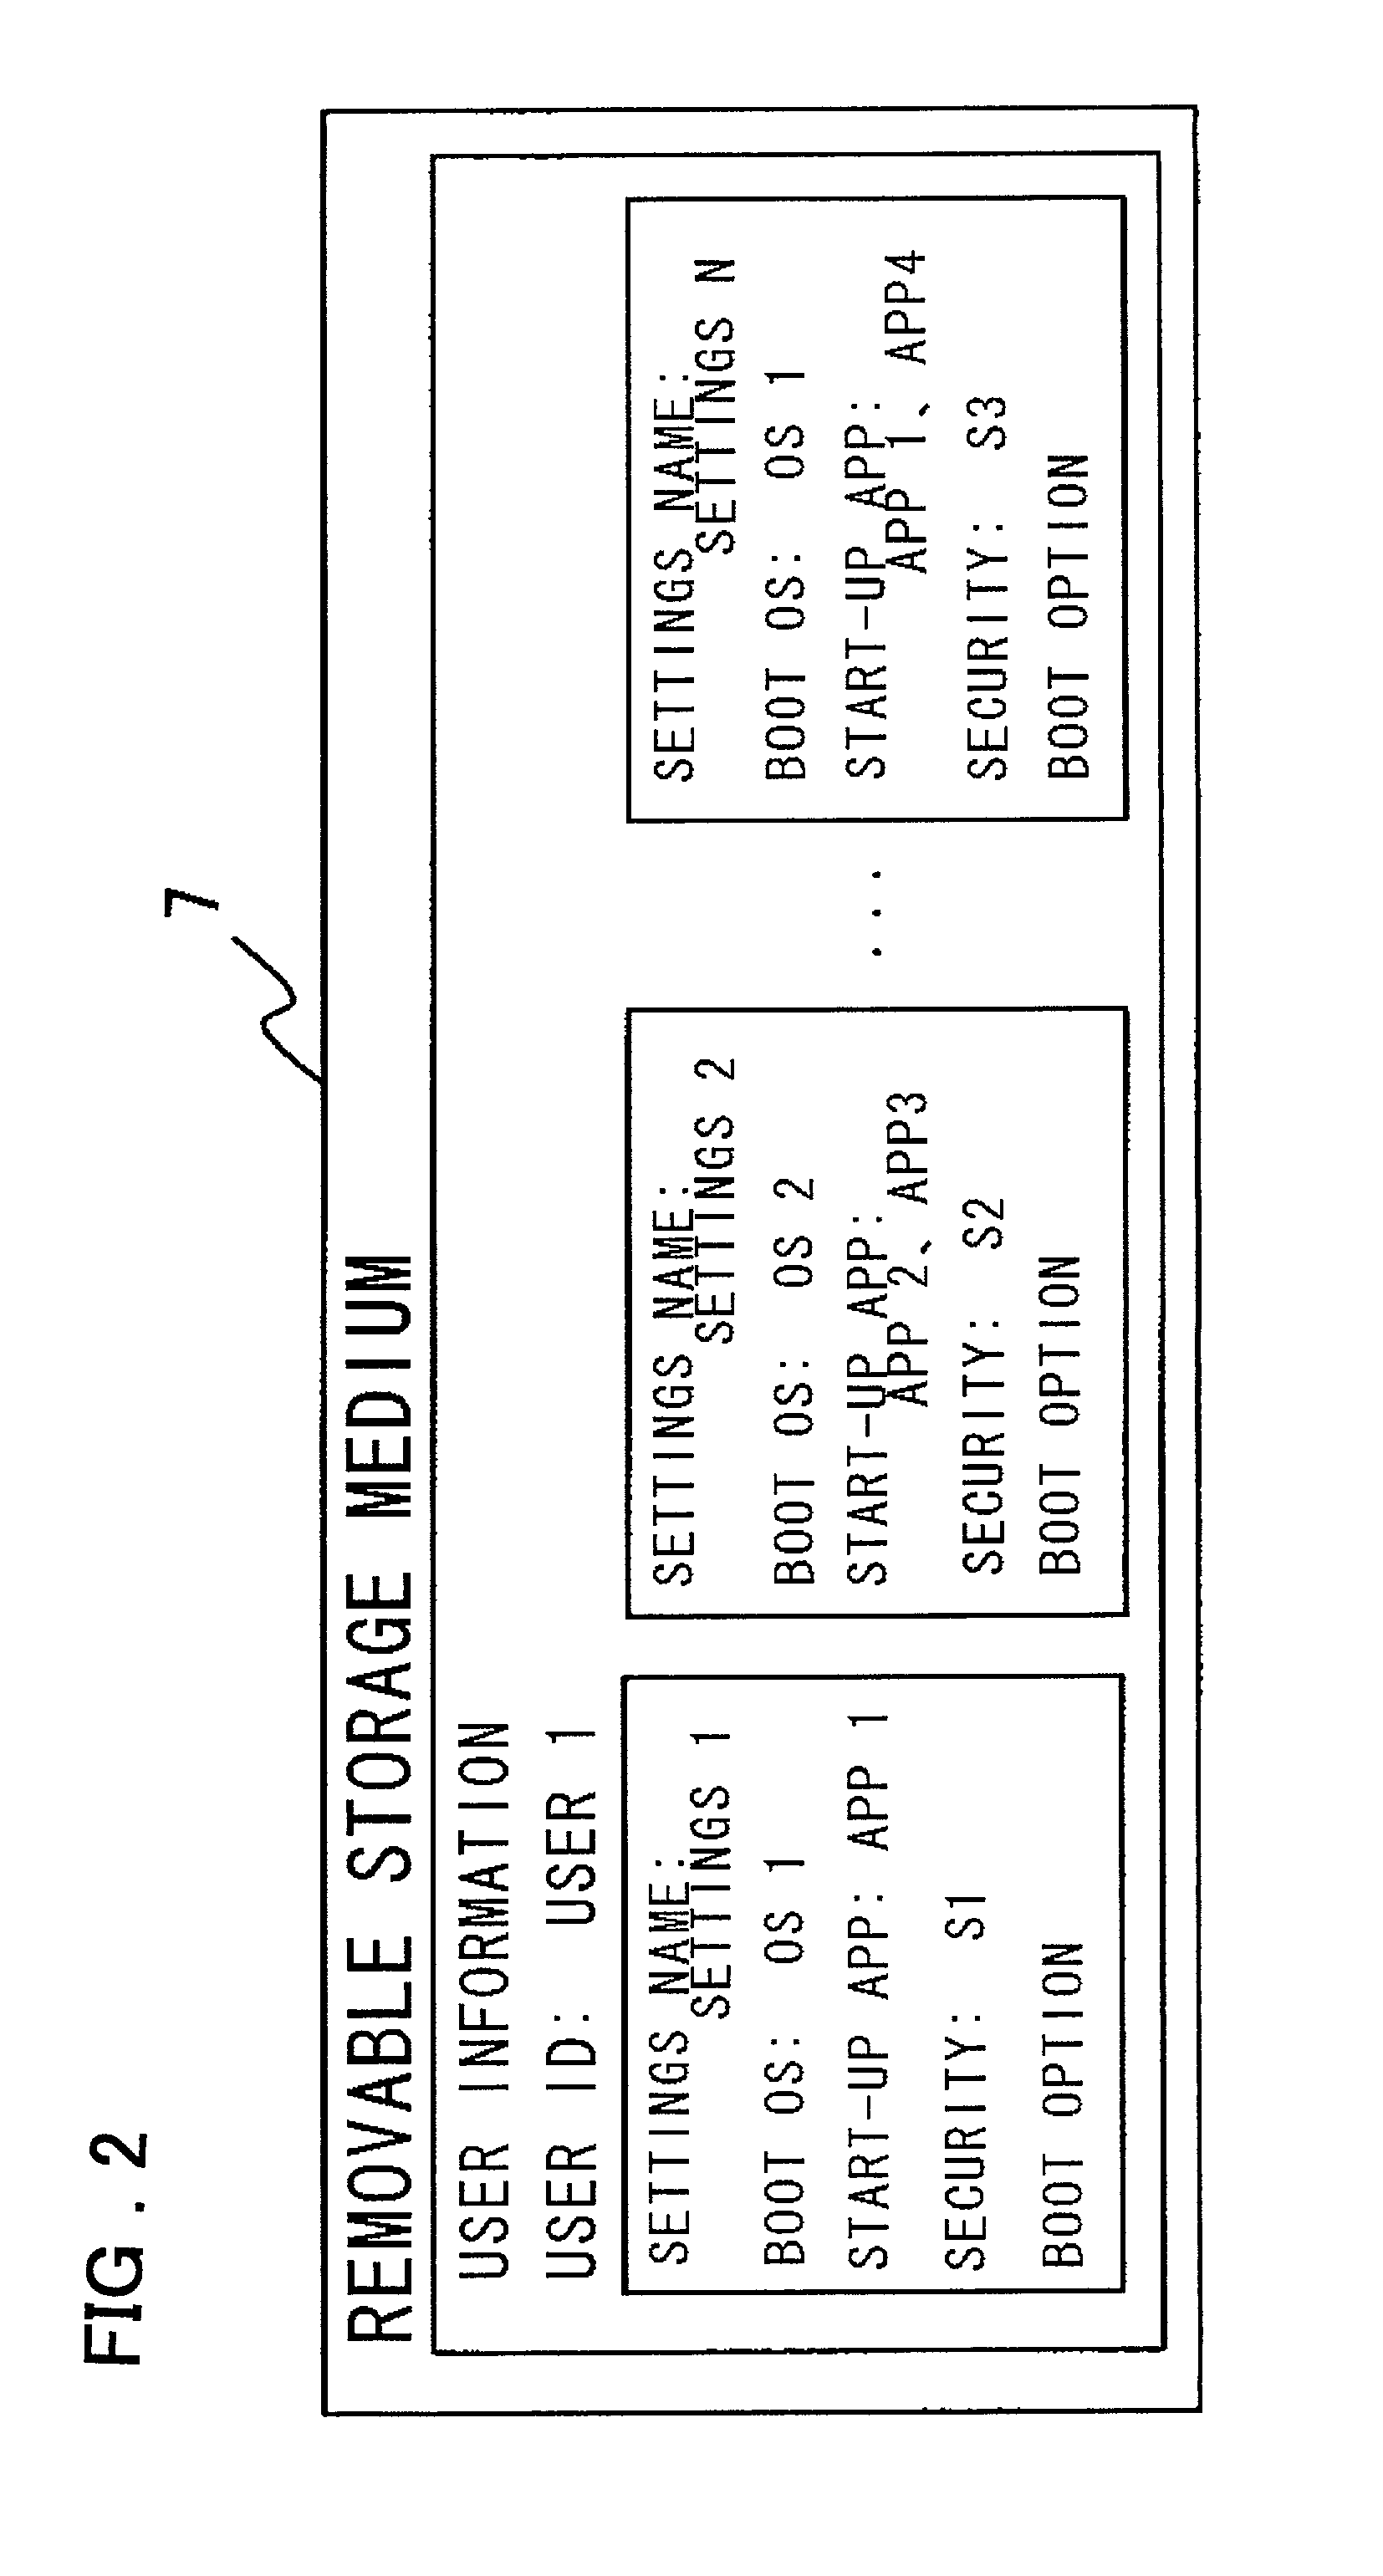 User-authentication-type network operating system booting method and system utilizing BIOS preboot environment